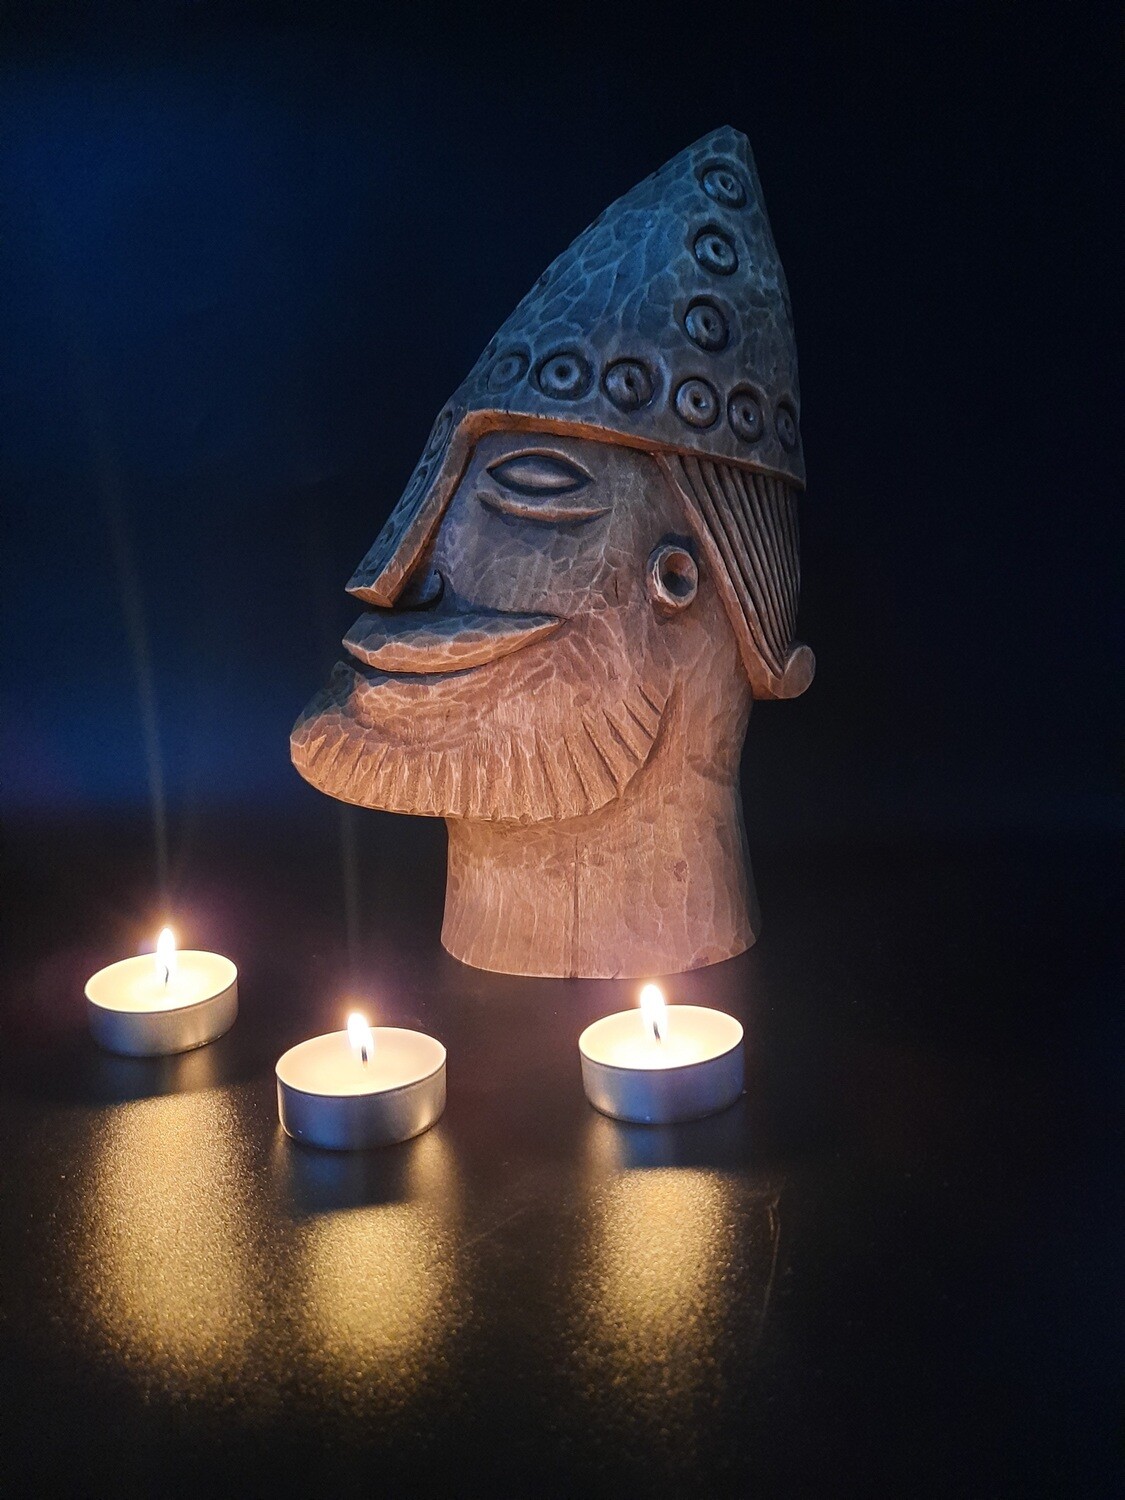 Viking in Helmet Statue, We call it God Thor Statue because it came really positive, Hand Carved in Wood